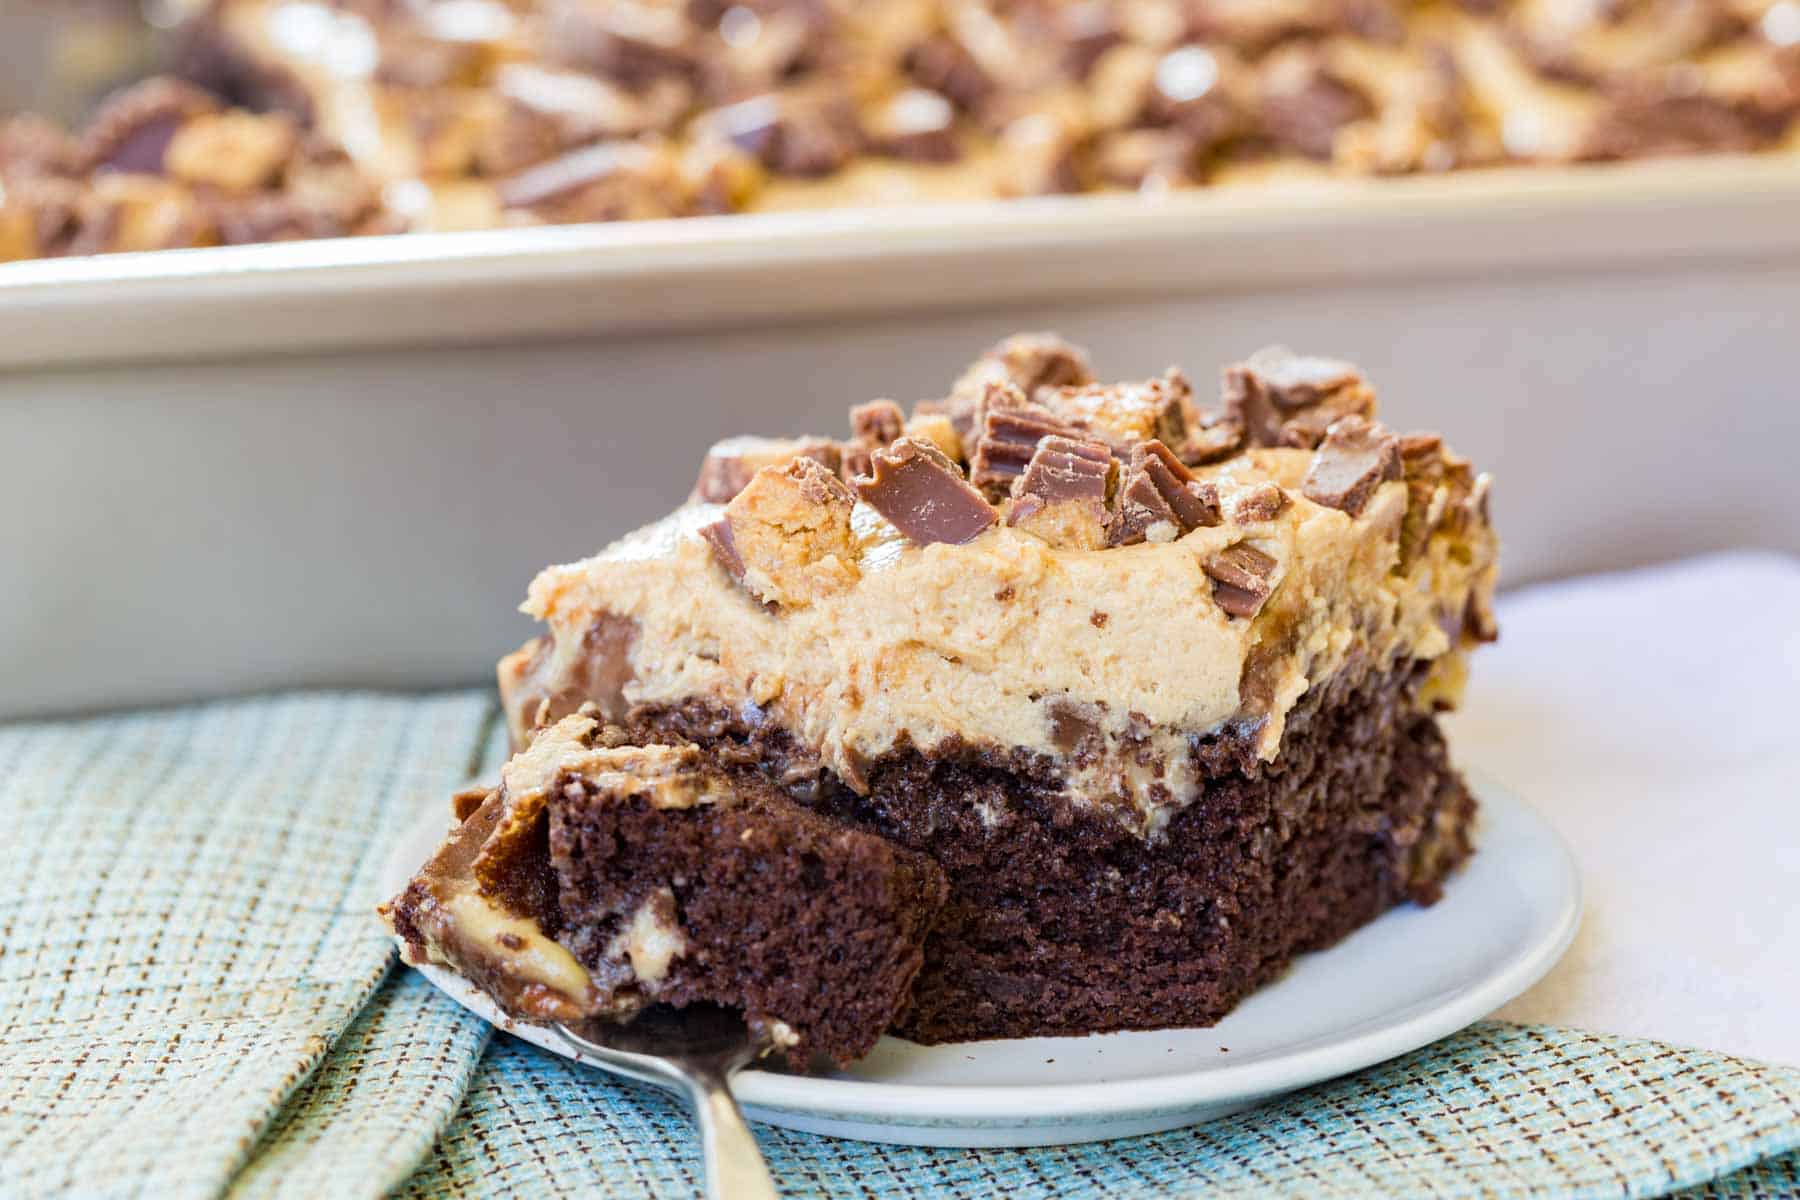 Apiece of Reeses Peanut Butter Cup Poke Cake with a fork on a small white plate on top of a blue plaid cloth napkin.